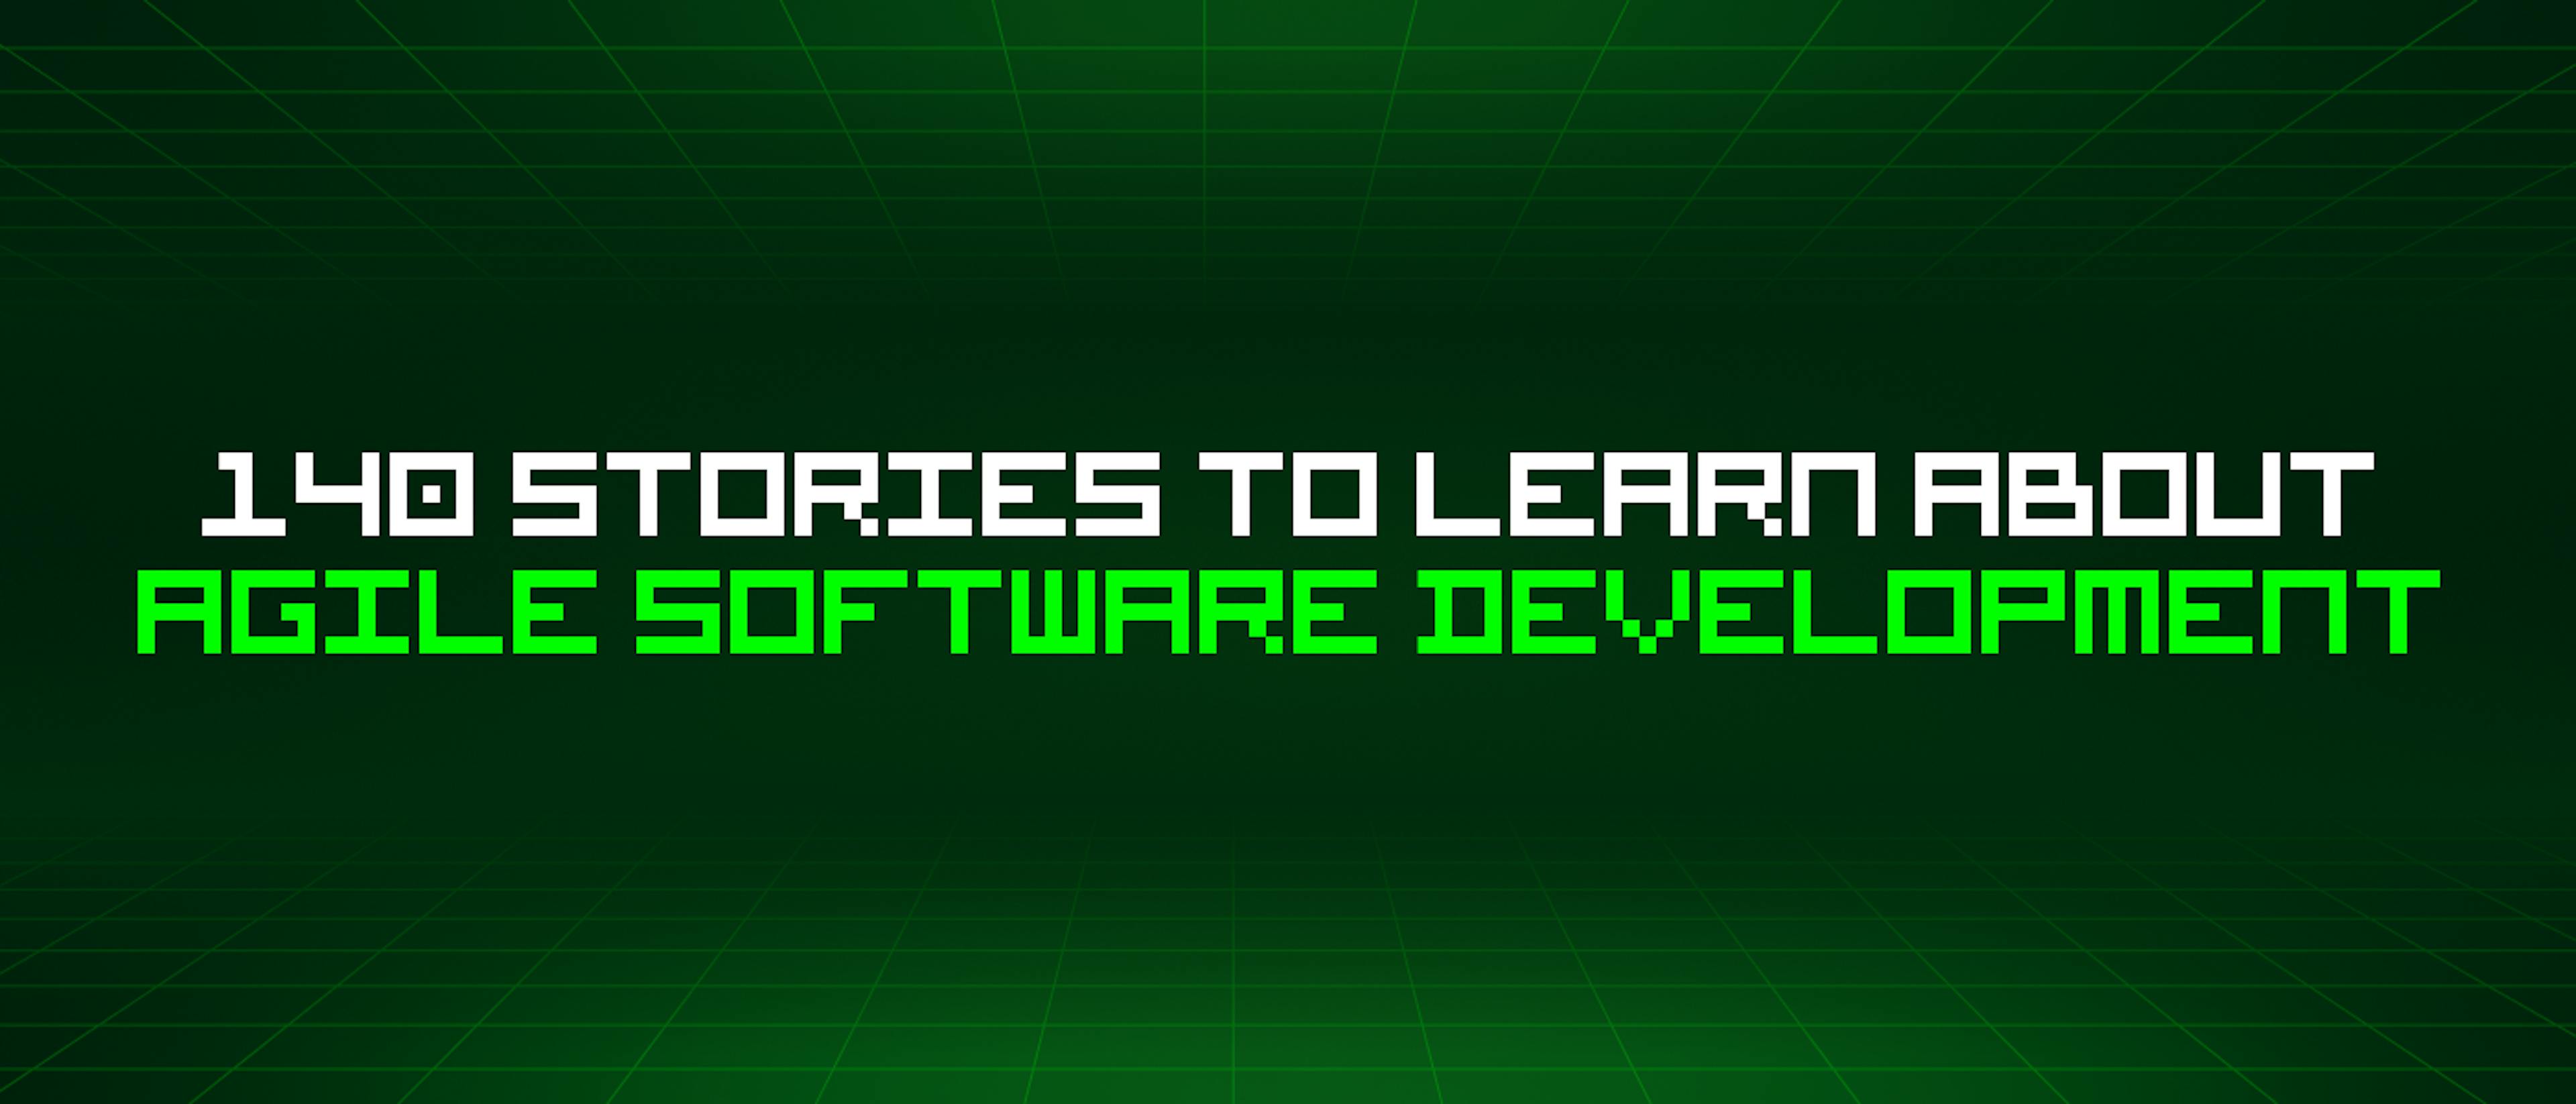 featured image - 140 Stories To Learn About Agile Software Development